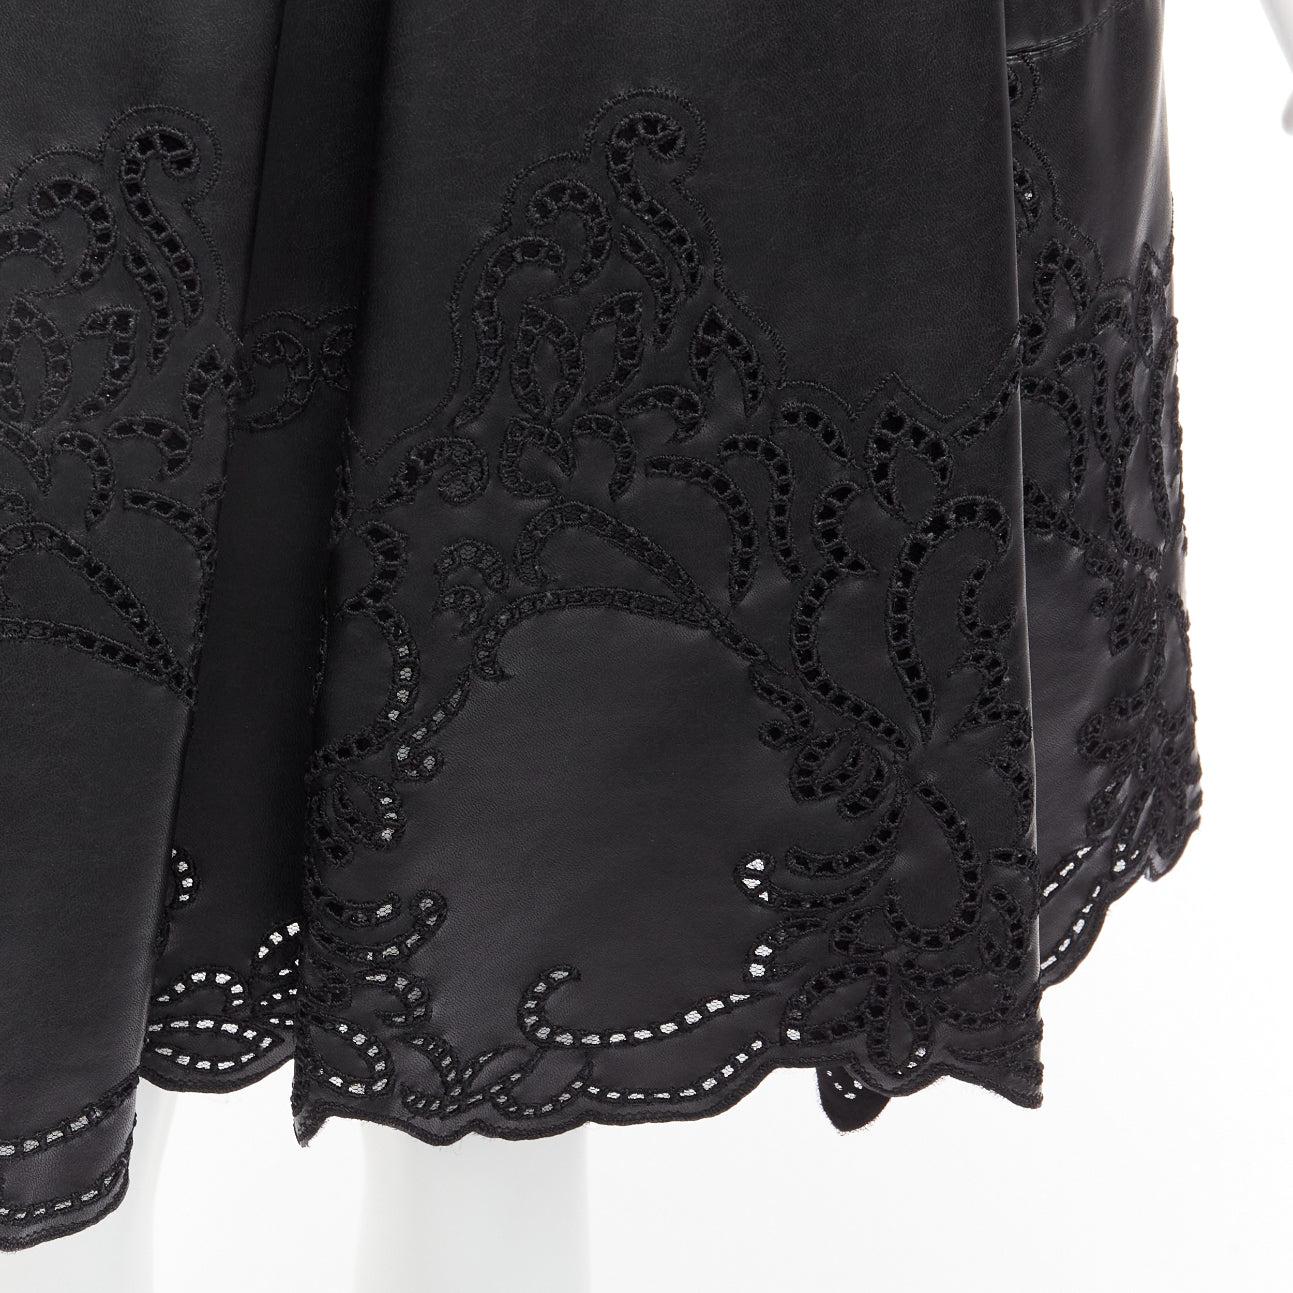 ERMANNO SCERVINO black faux leather lattice embroidery scalloped skirt IT38 XS
Reference: AAWC/A00583
Brand: Ermanno Scervino
Material: Polyamide
Color: Black
Pattern: Solid
Closure: Zip
Lining: Black Polyester
Extra Details: Pleated skirt. Zip back